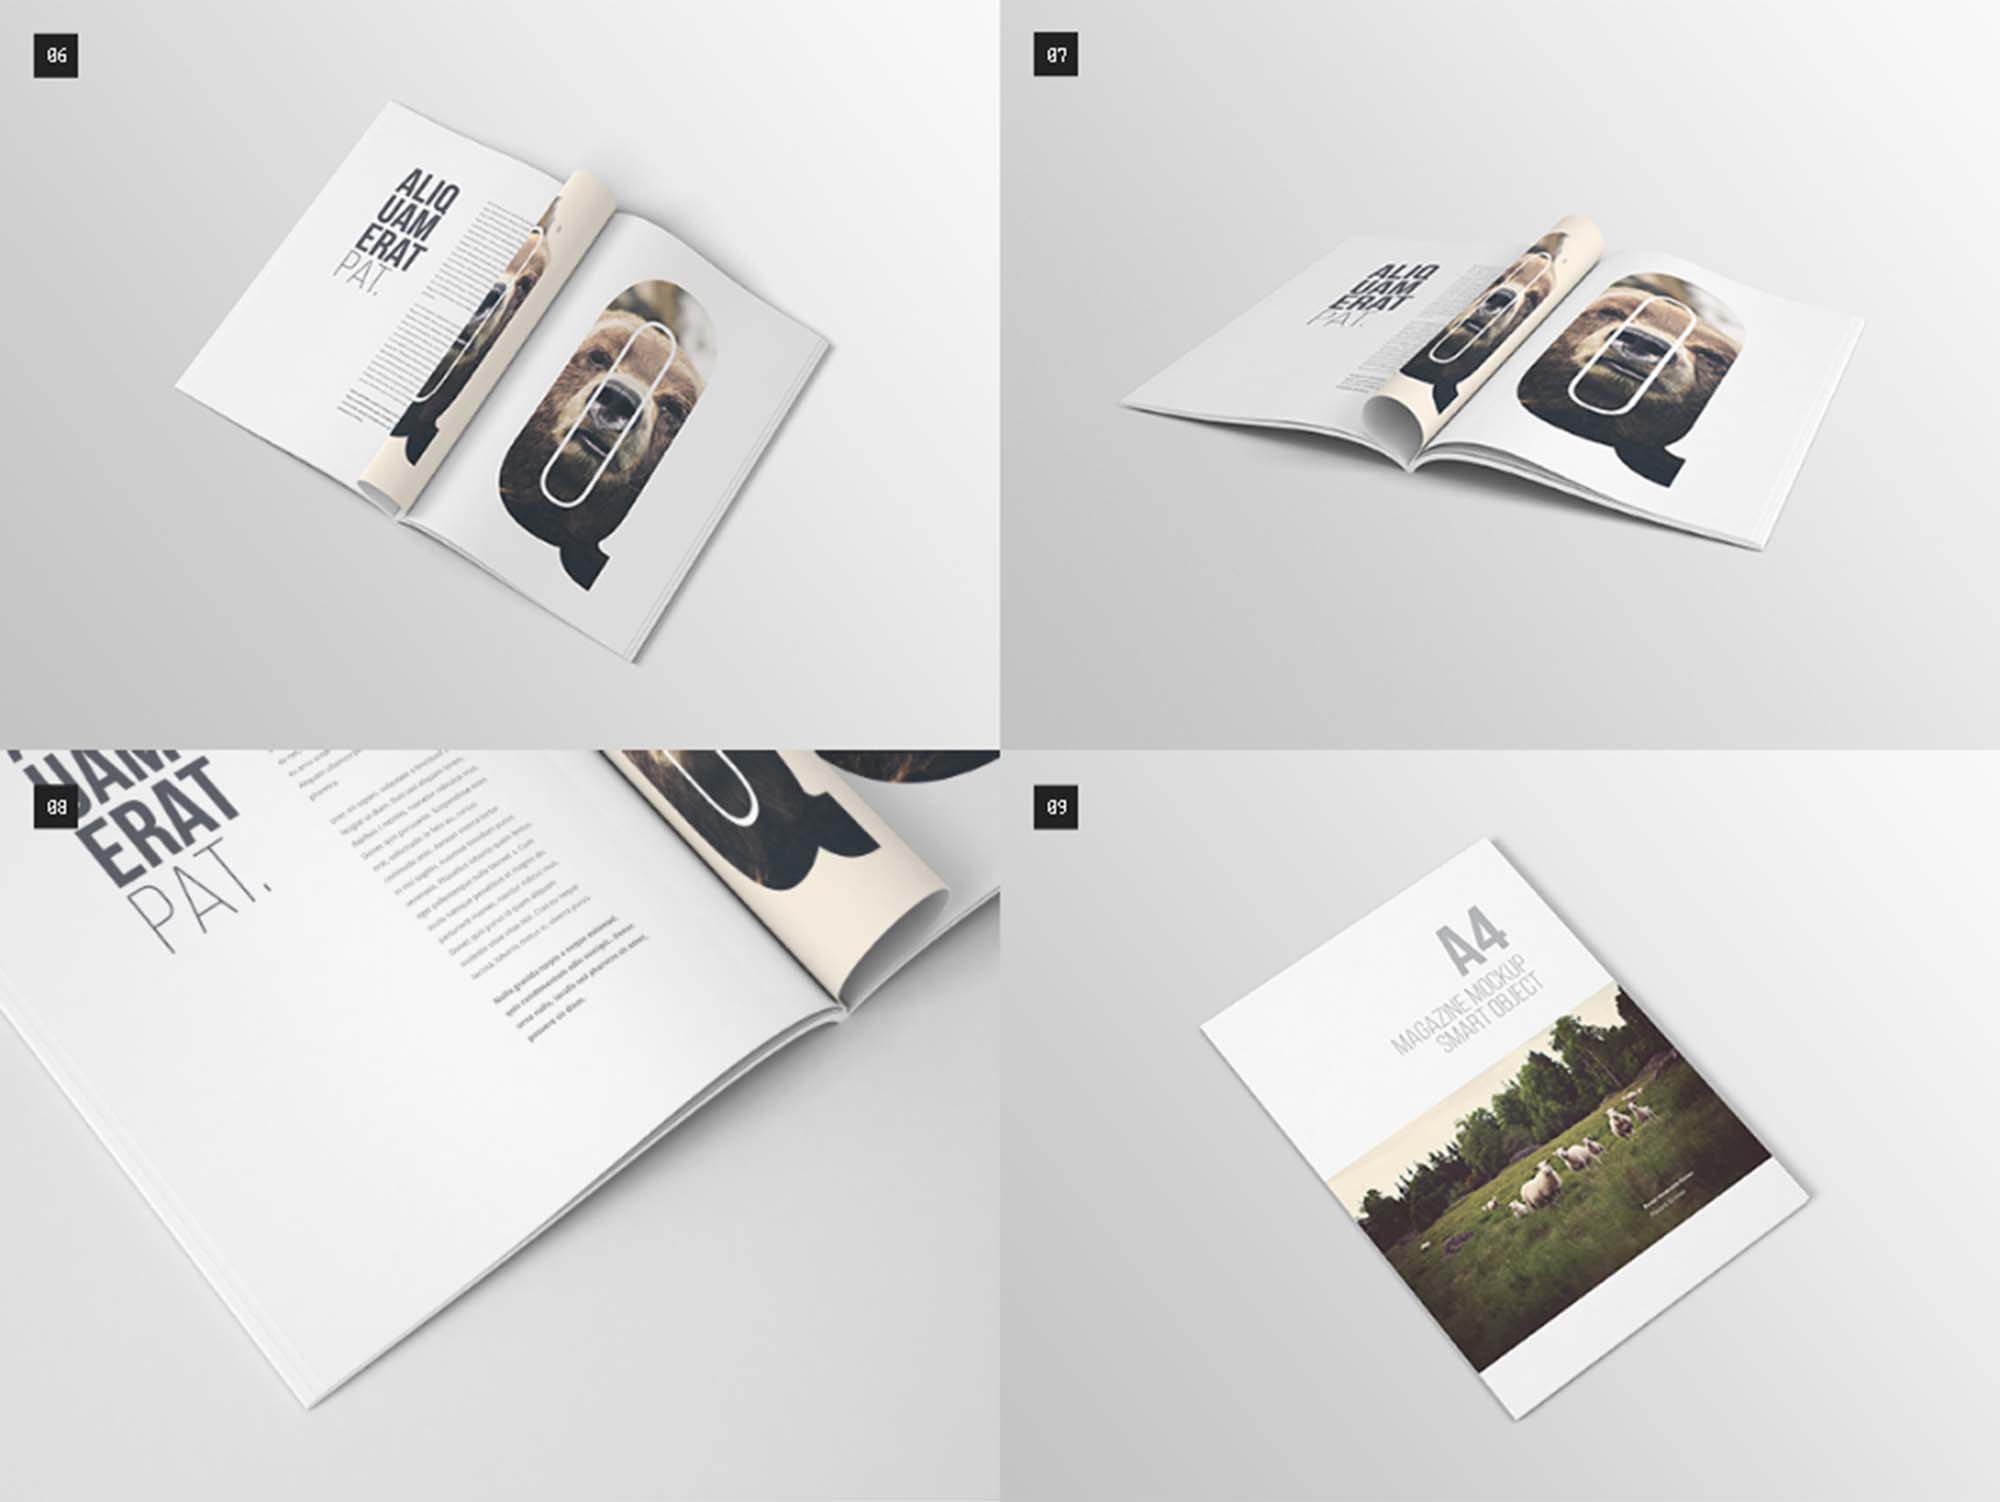 Download A4 Magazine Psd Mockup Free By Blugraphic